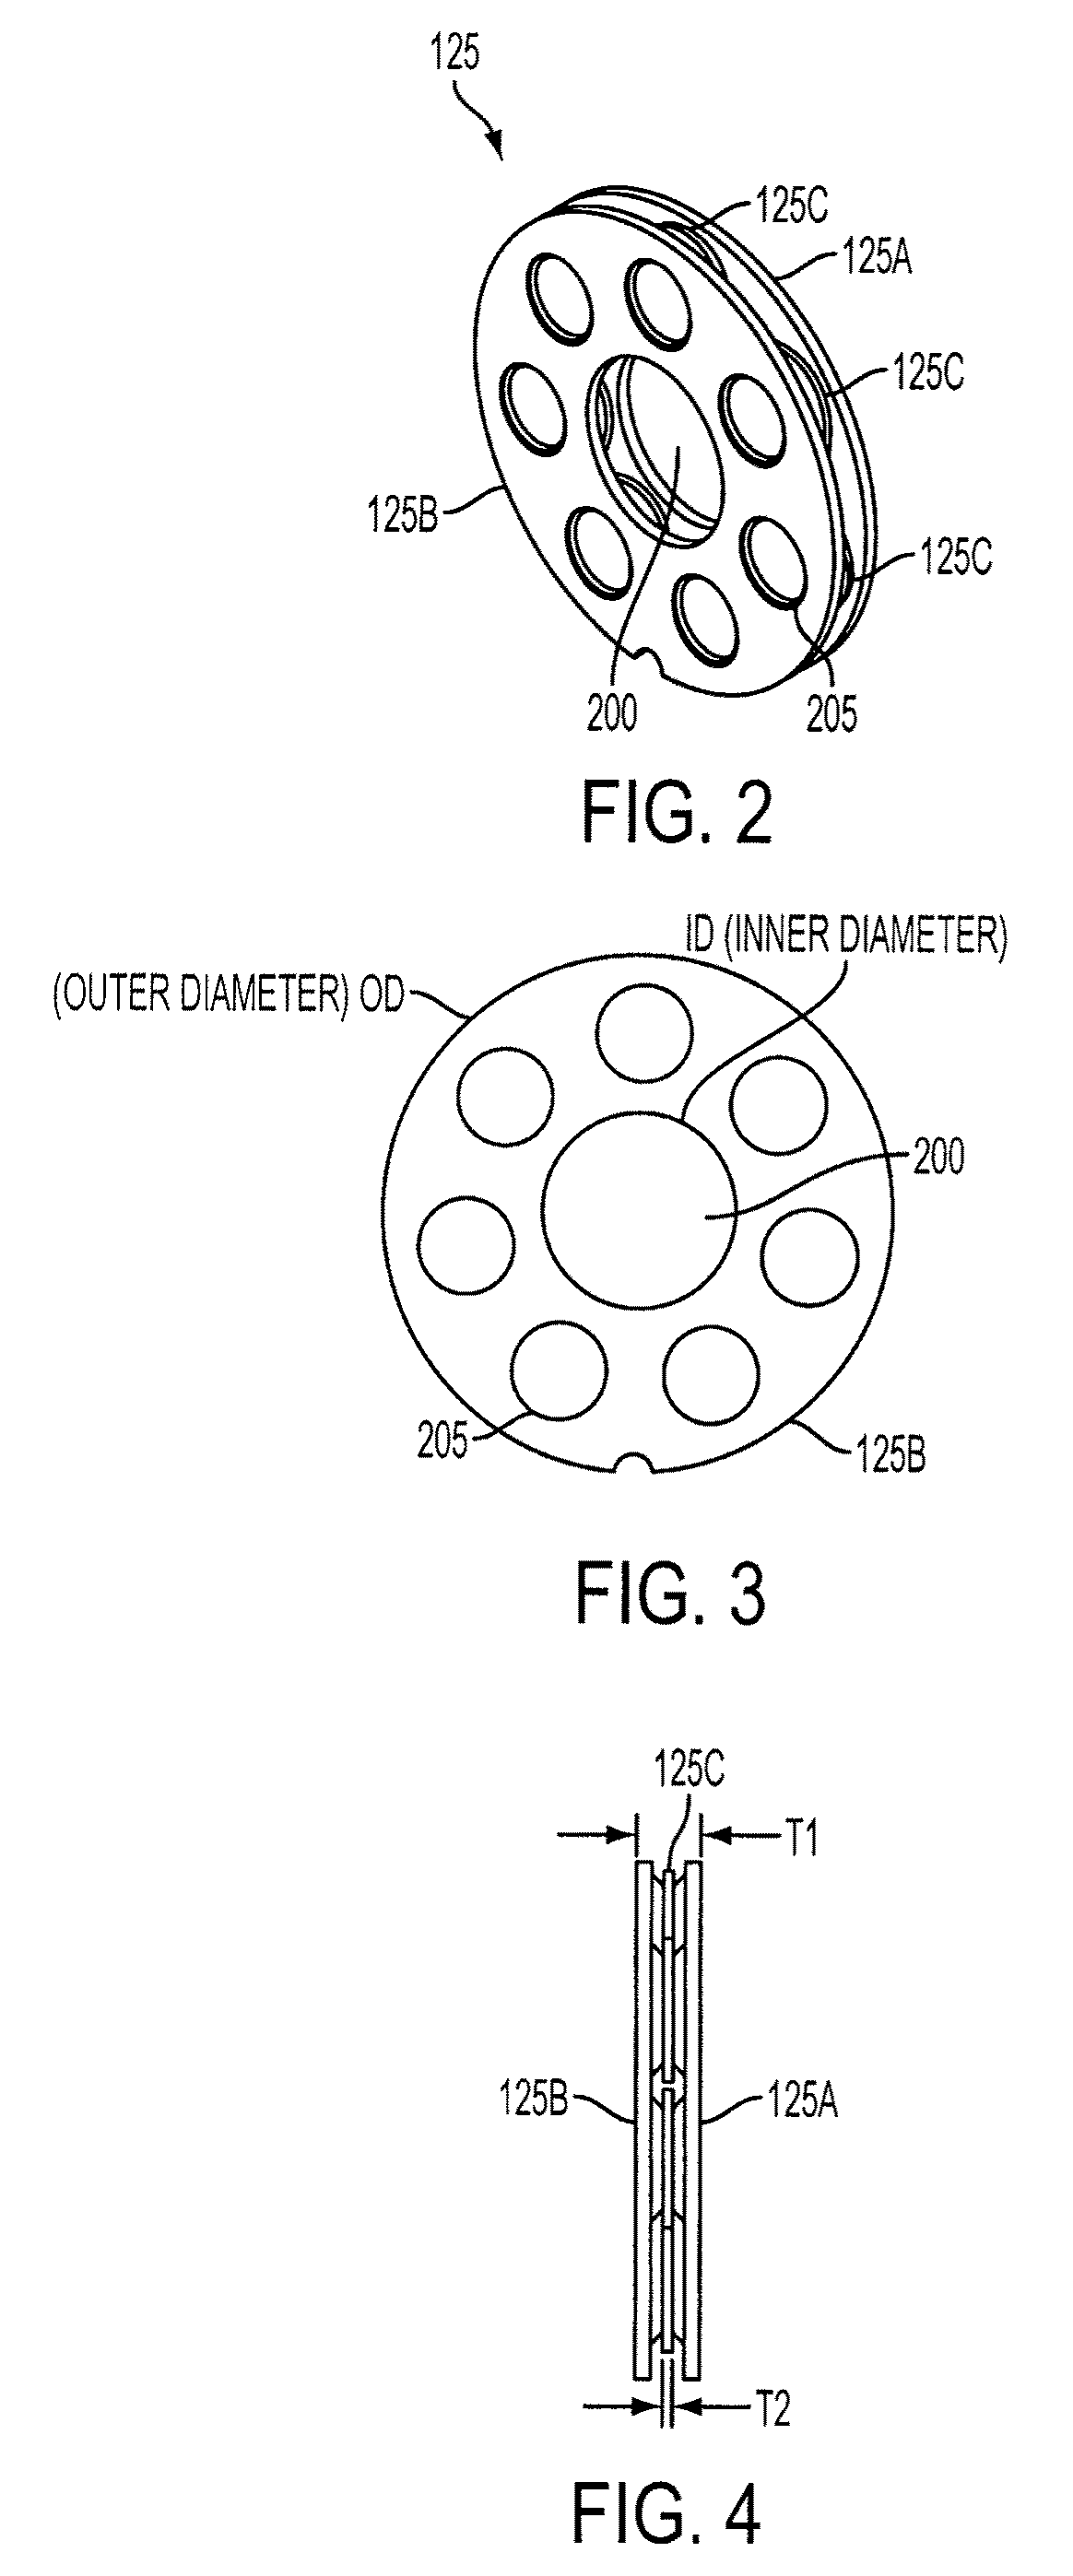 Surge suppression device having one or more rings